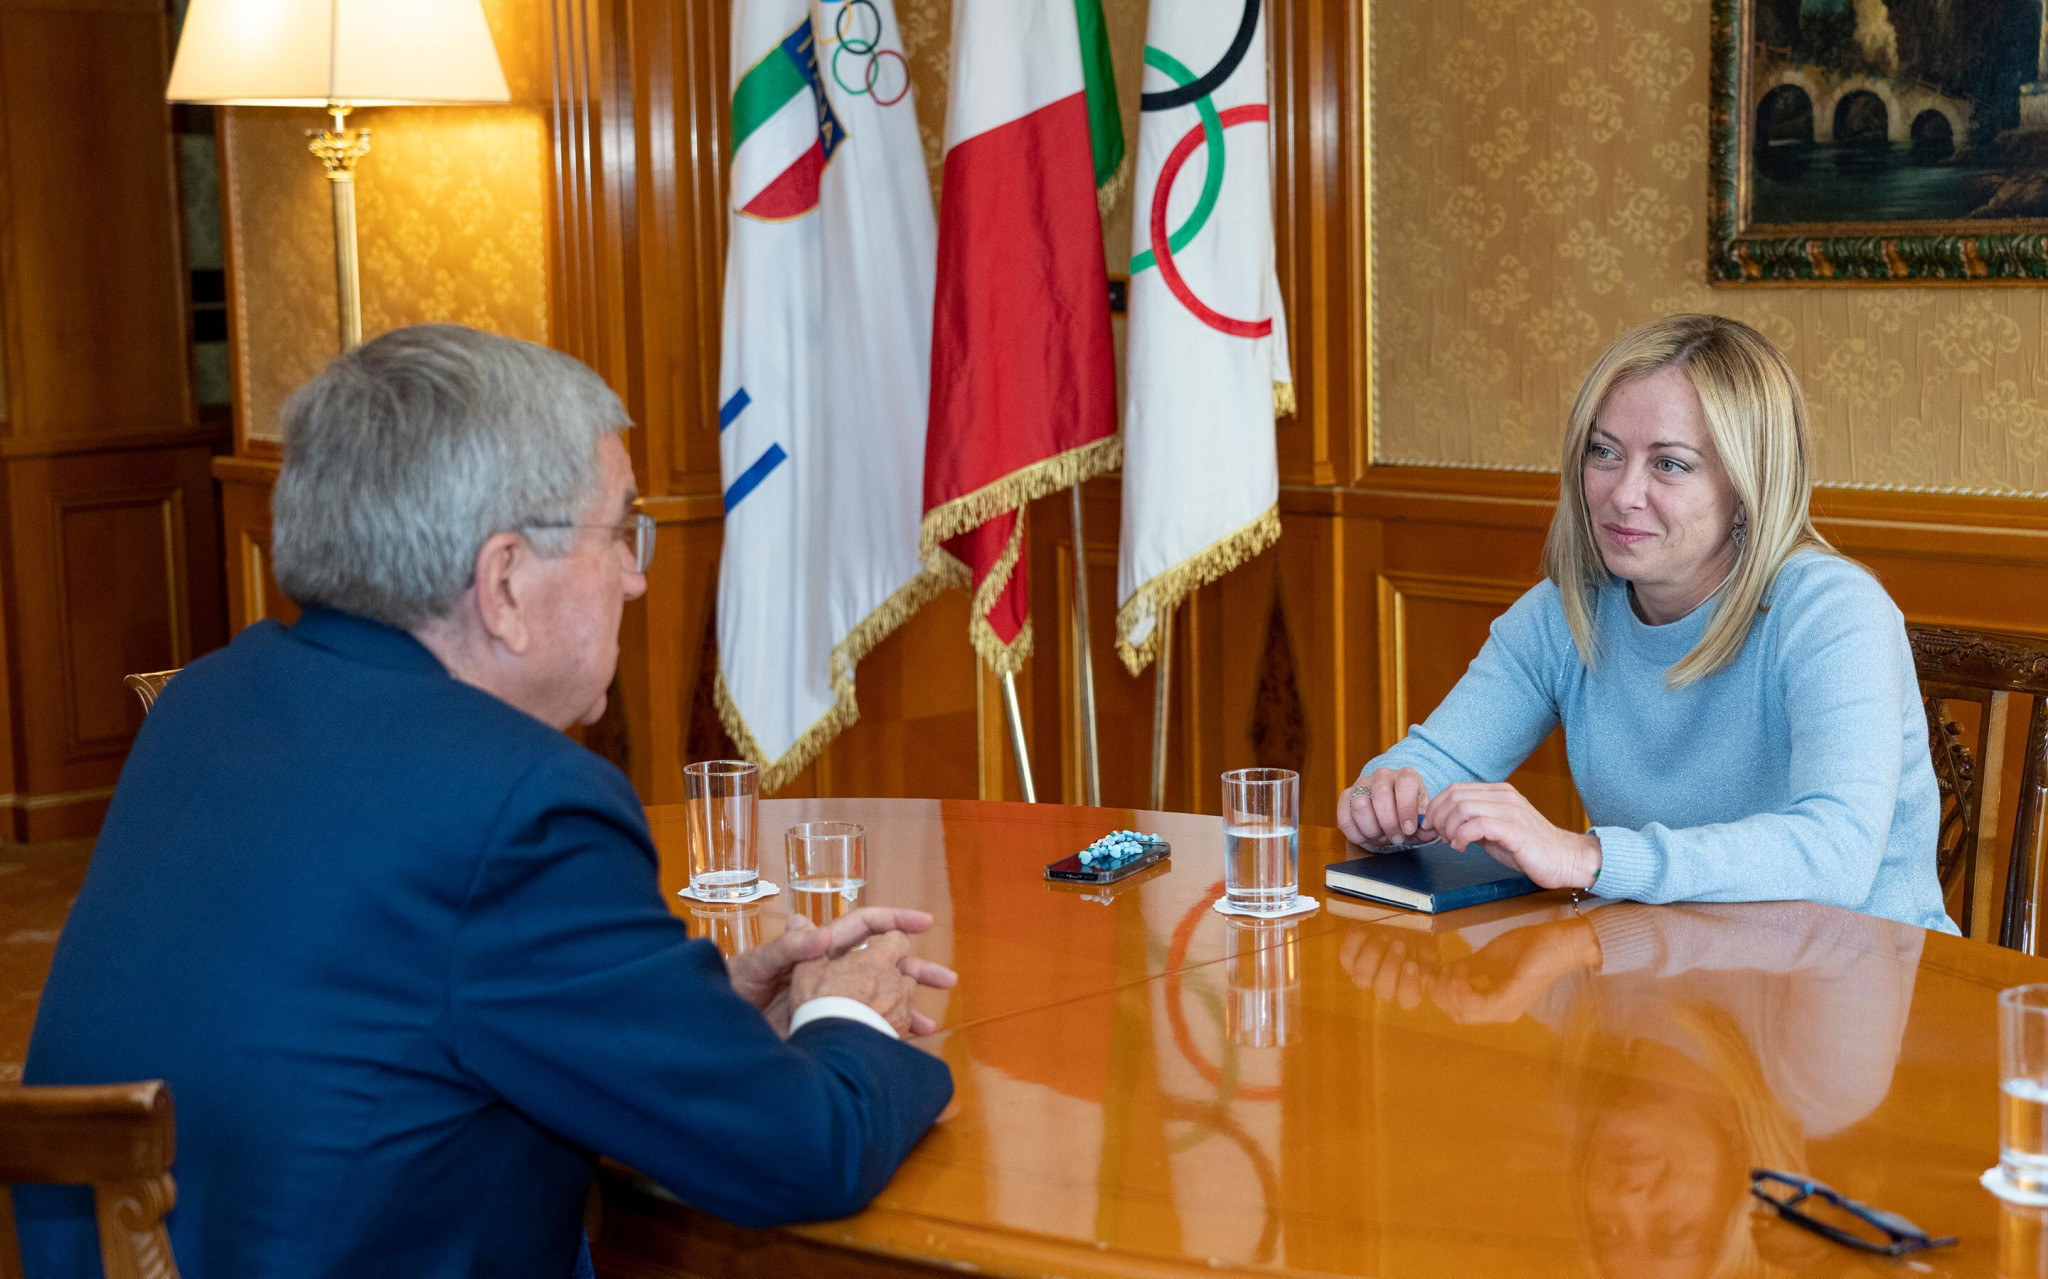 Italy's new Prime Minister Giorgia Meloni, pictured with IOC President Thomas Bach in Rome last month, is reported to have appointed Letizia Moratti as chief executive of the Milan Cortina 2026 Winter Olympics - but Moratti has not confirmed the appointment ©Getty Images